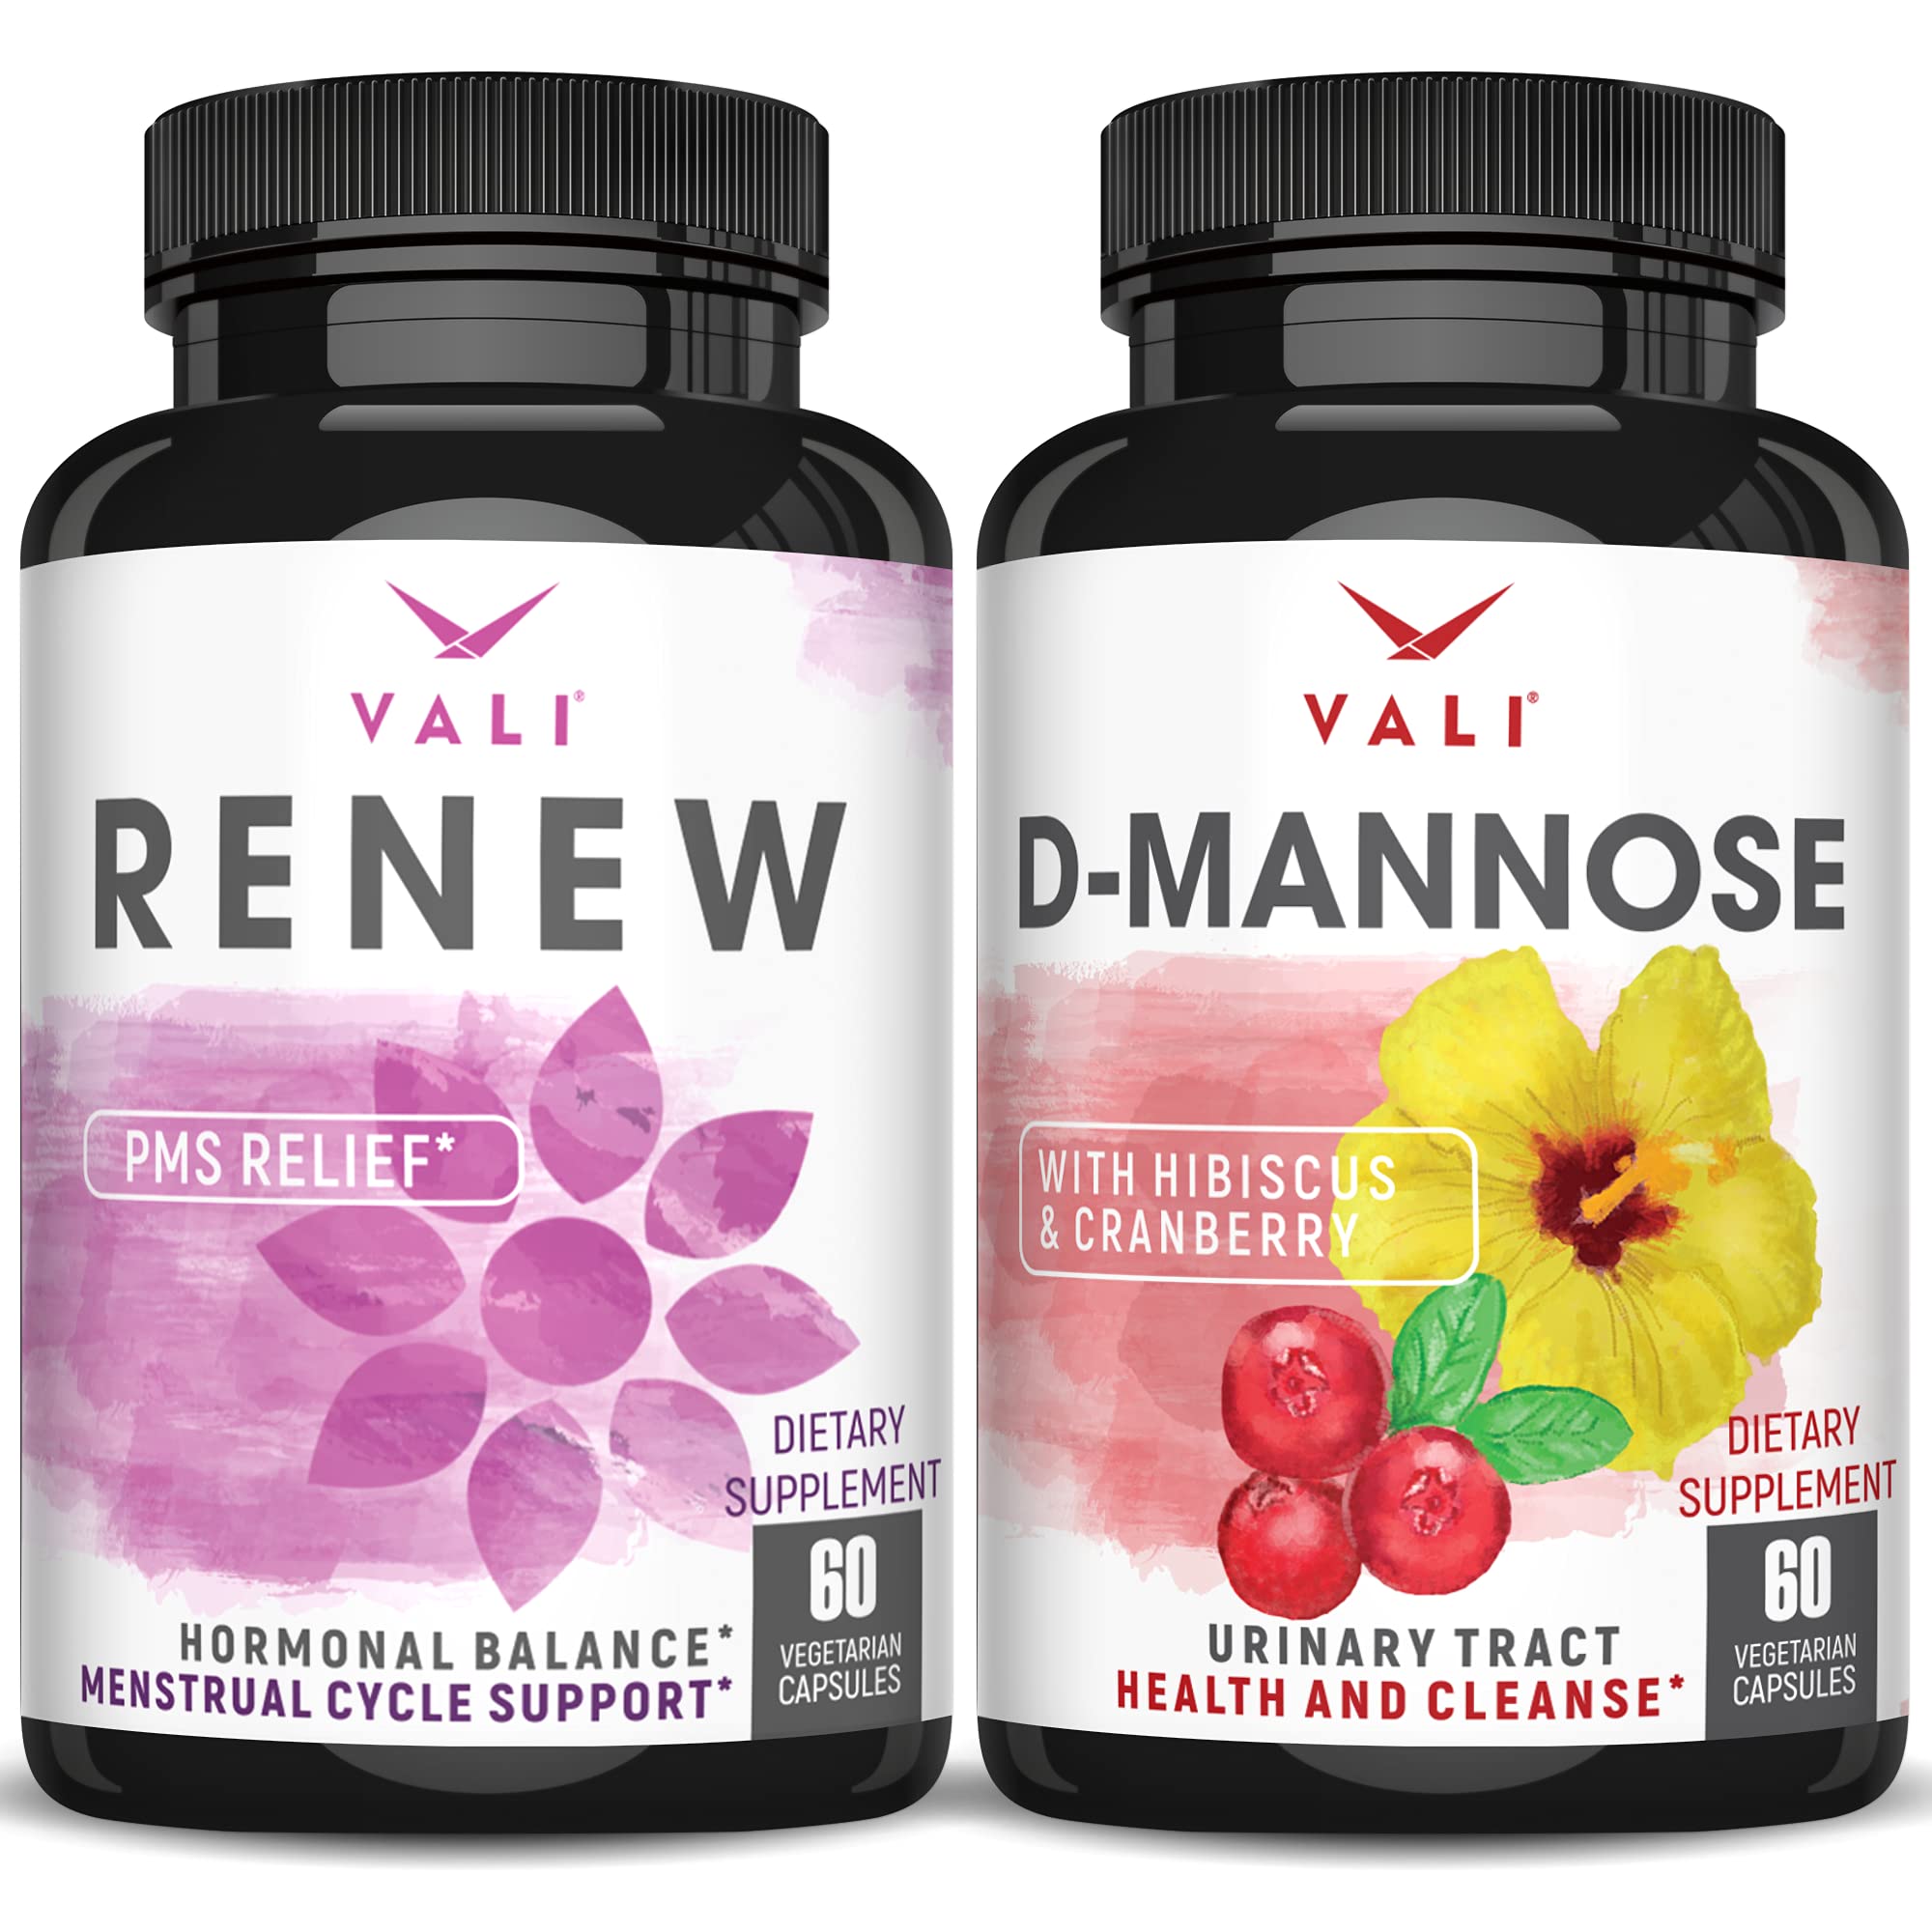 VALI D-Mannose & VALI Renew PMS Bundle - Urinary Tract Health and Cleanse with D-Mannose, Cranberry & Hibiscus and PMS Relief Supplement for Women’s Menstrual Cycle Vitamins & Herbal Support